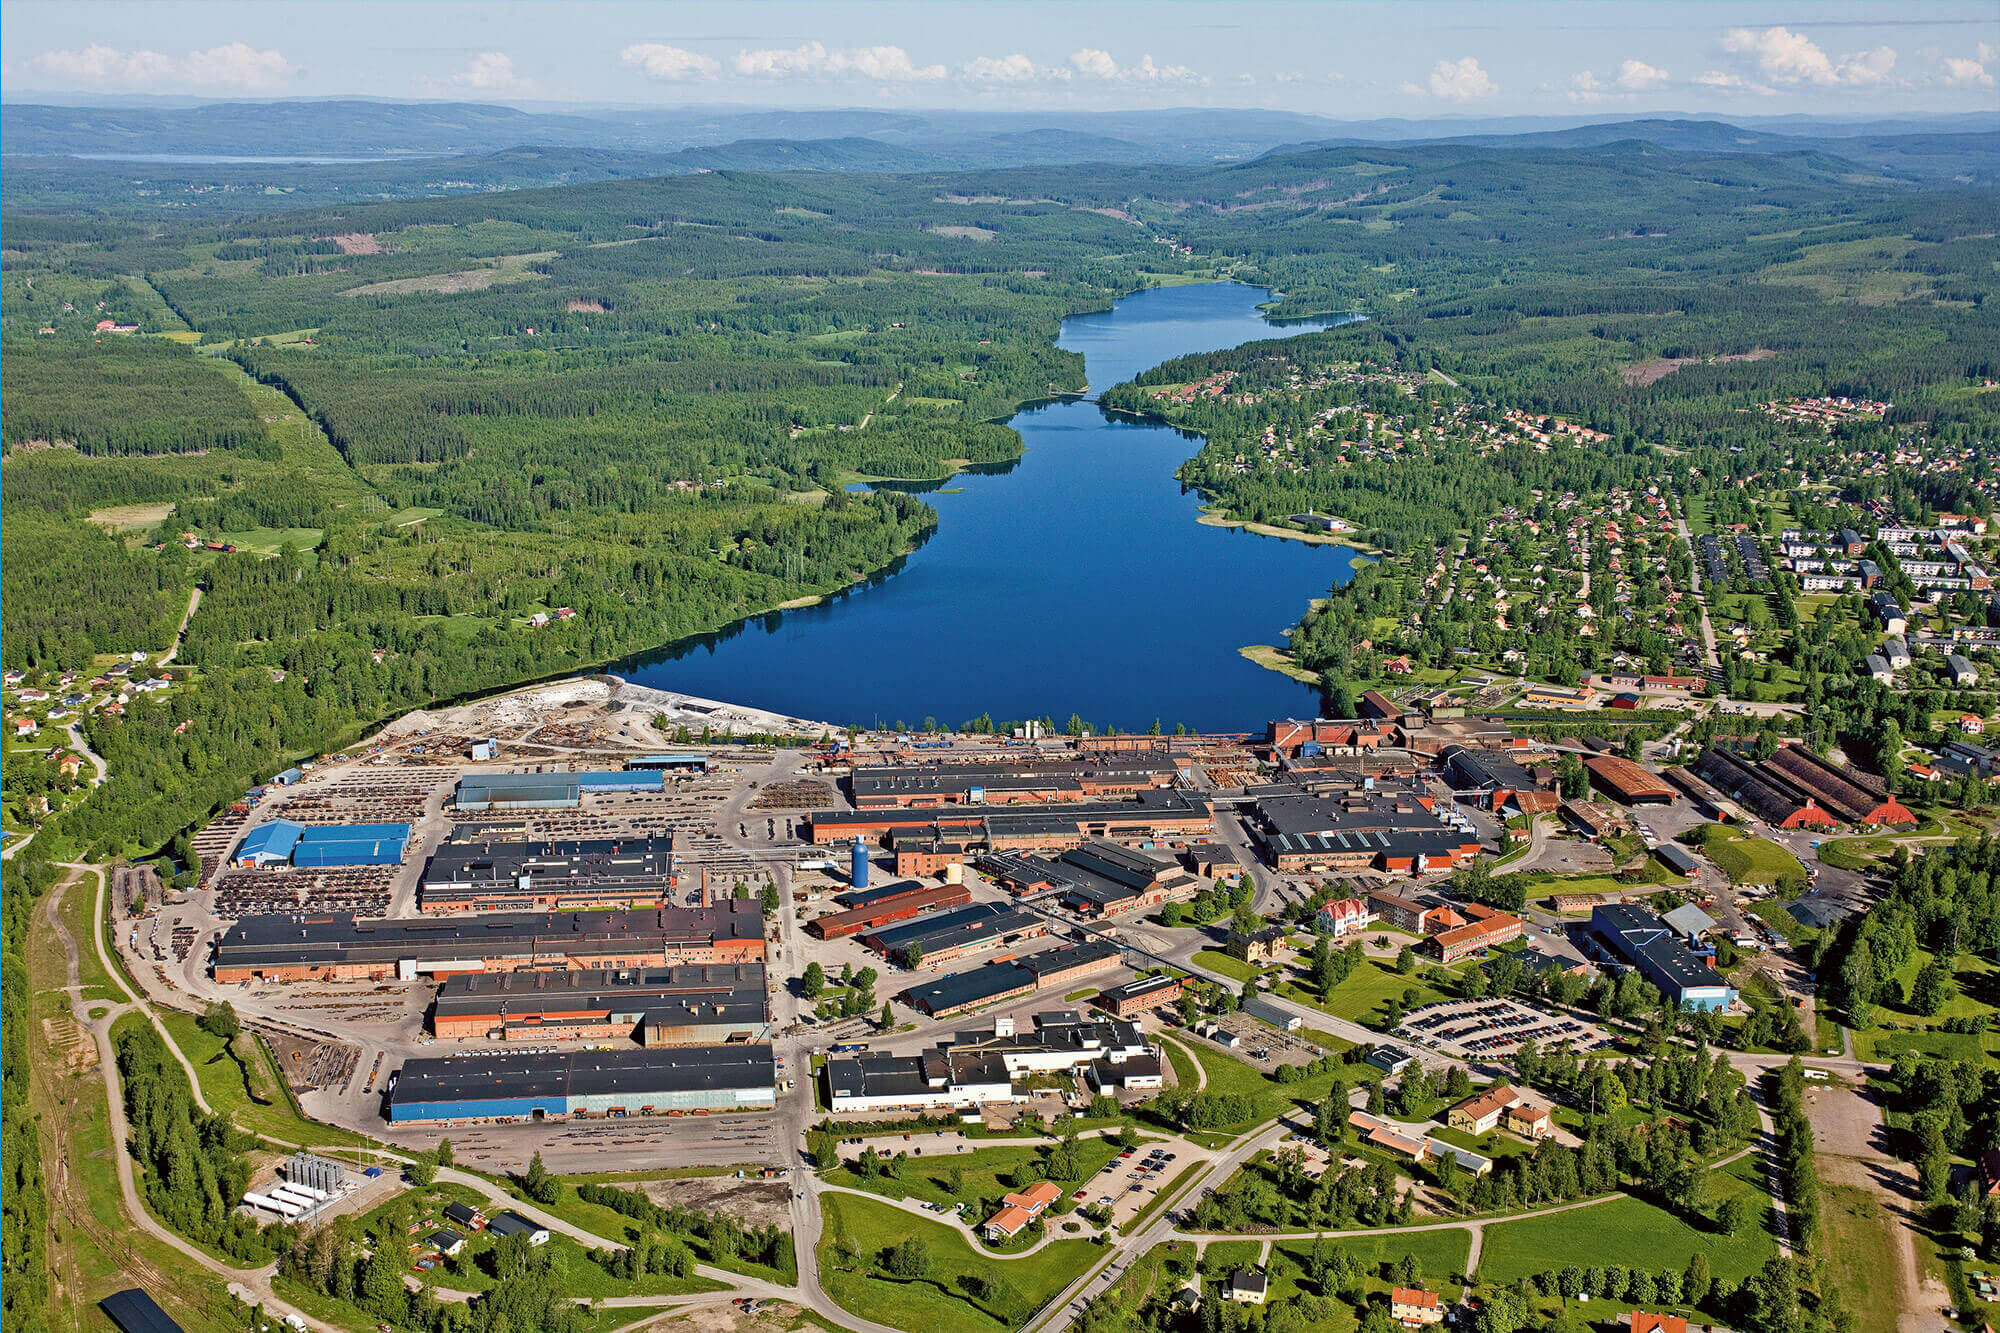 Aerial view of the Uddeholm steel plant facilities in Hagfors, Sweden